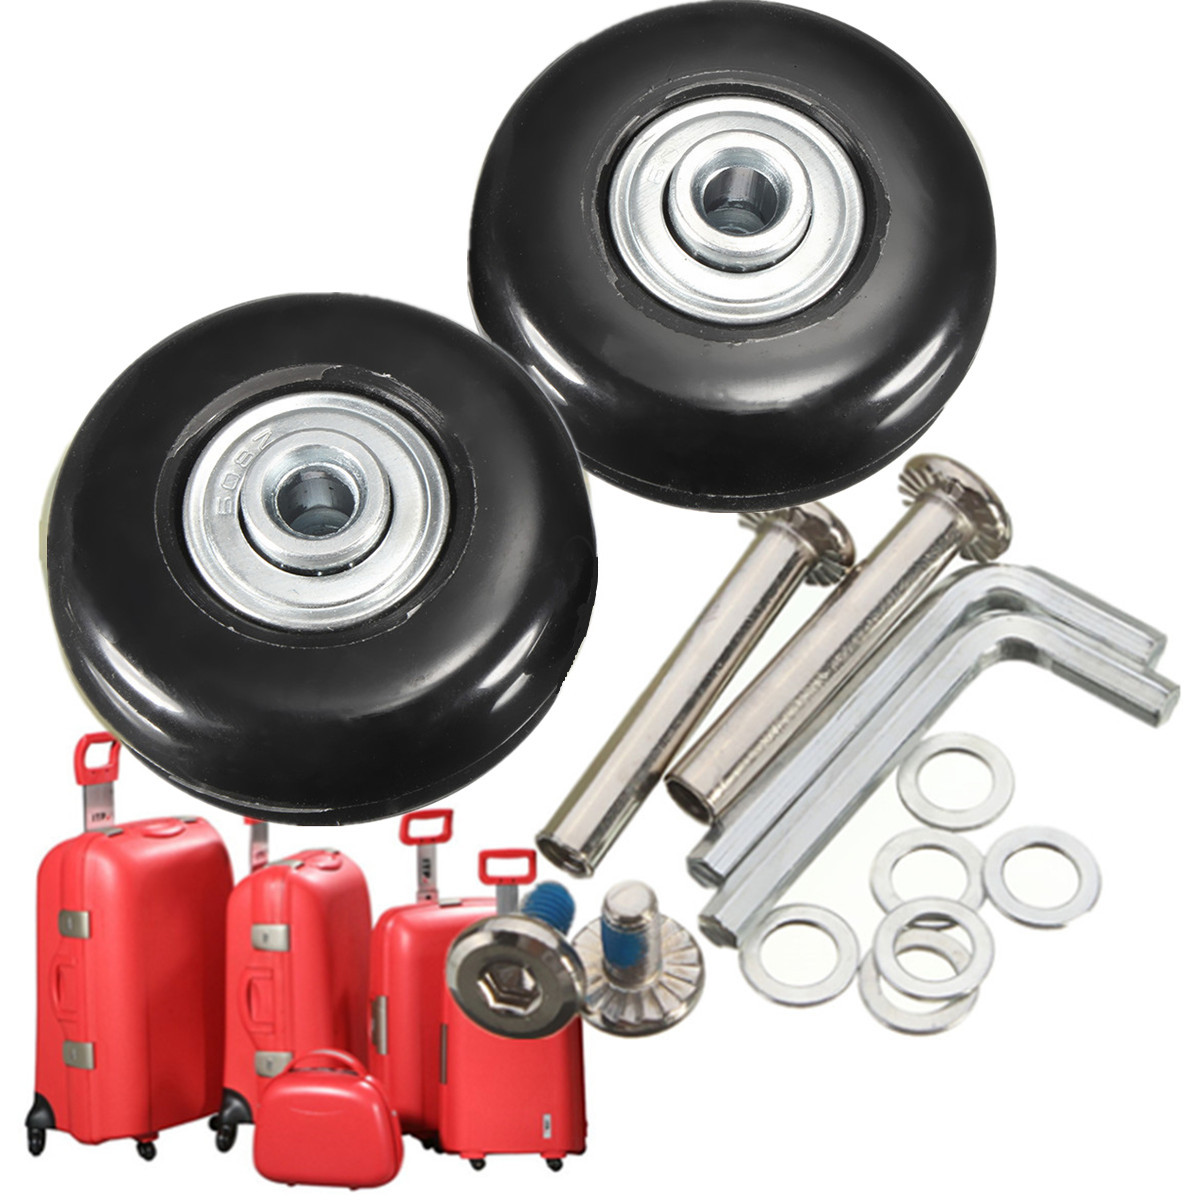 2-Sets-Luggage-Suitcase-Replacement-Wheels-OD-43-ID-6-W-18-Axles-30-Repair-Tools-1005576-5